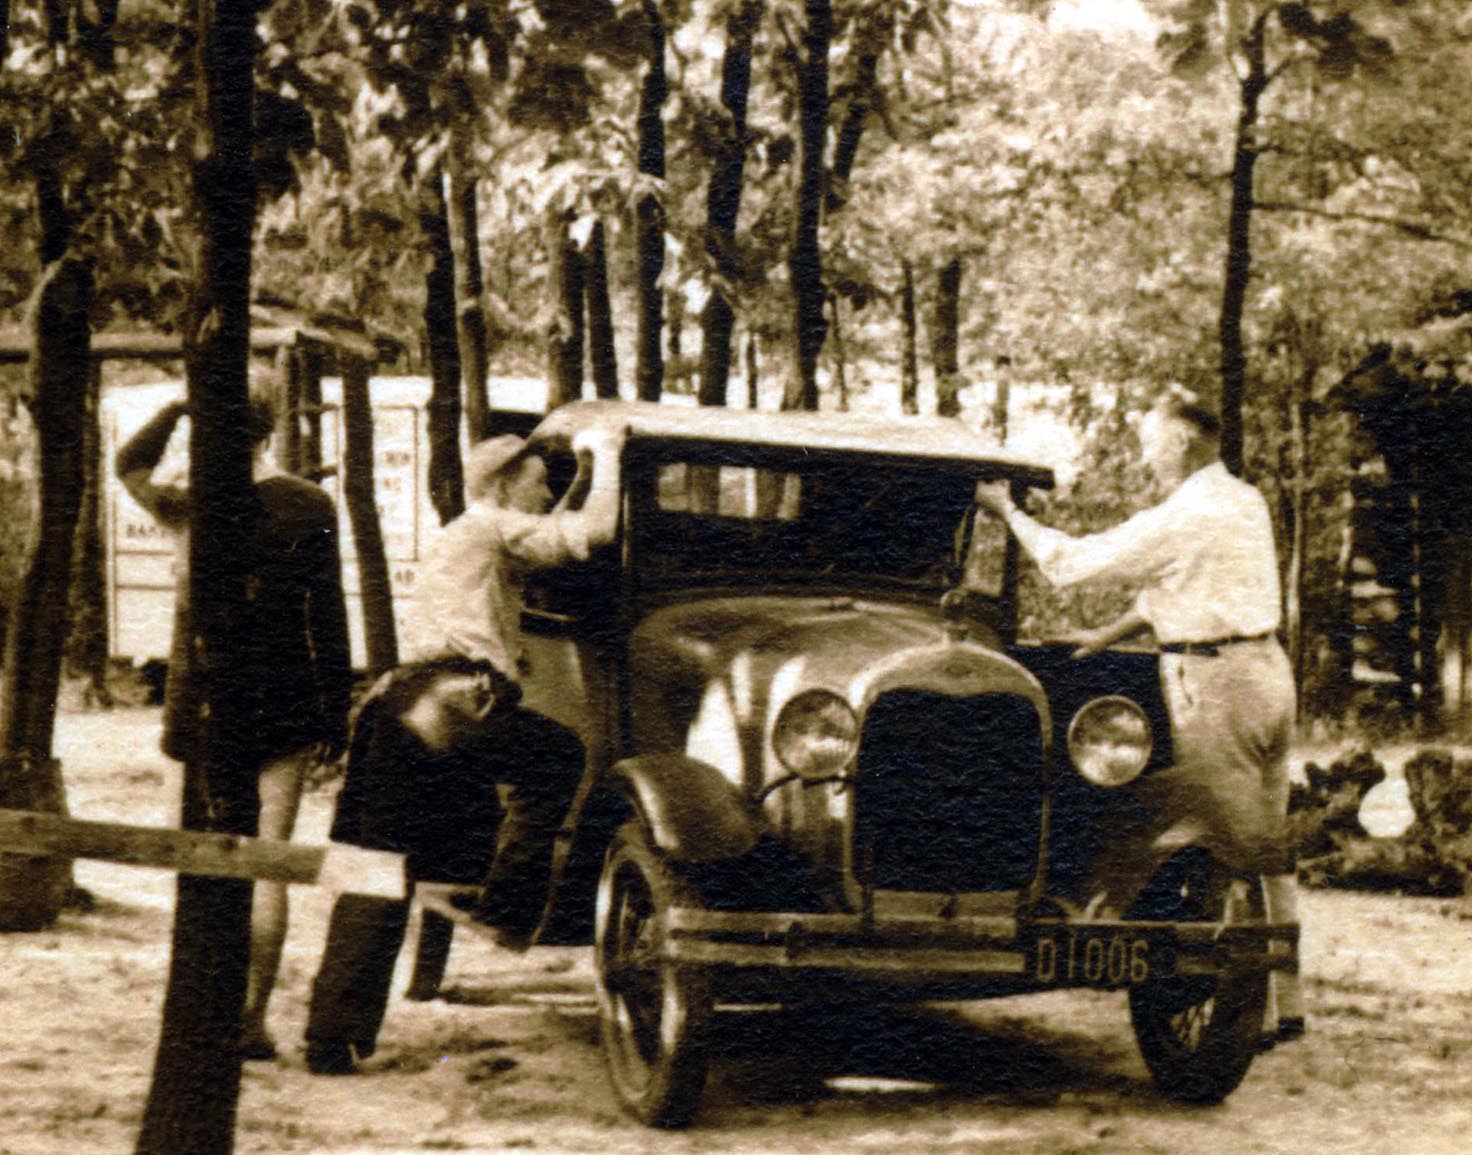 Clinton, Howard L. & Howard M. Alexander Working on "The Bruise" 1930 Ford Coupe